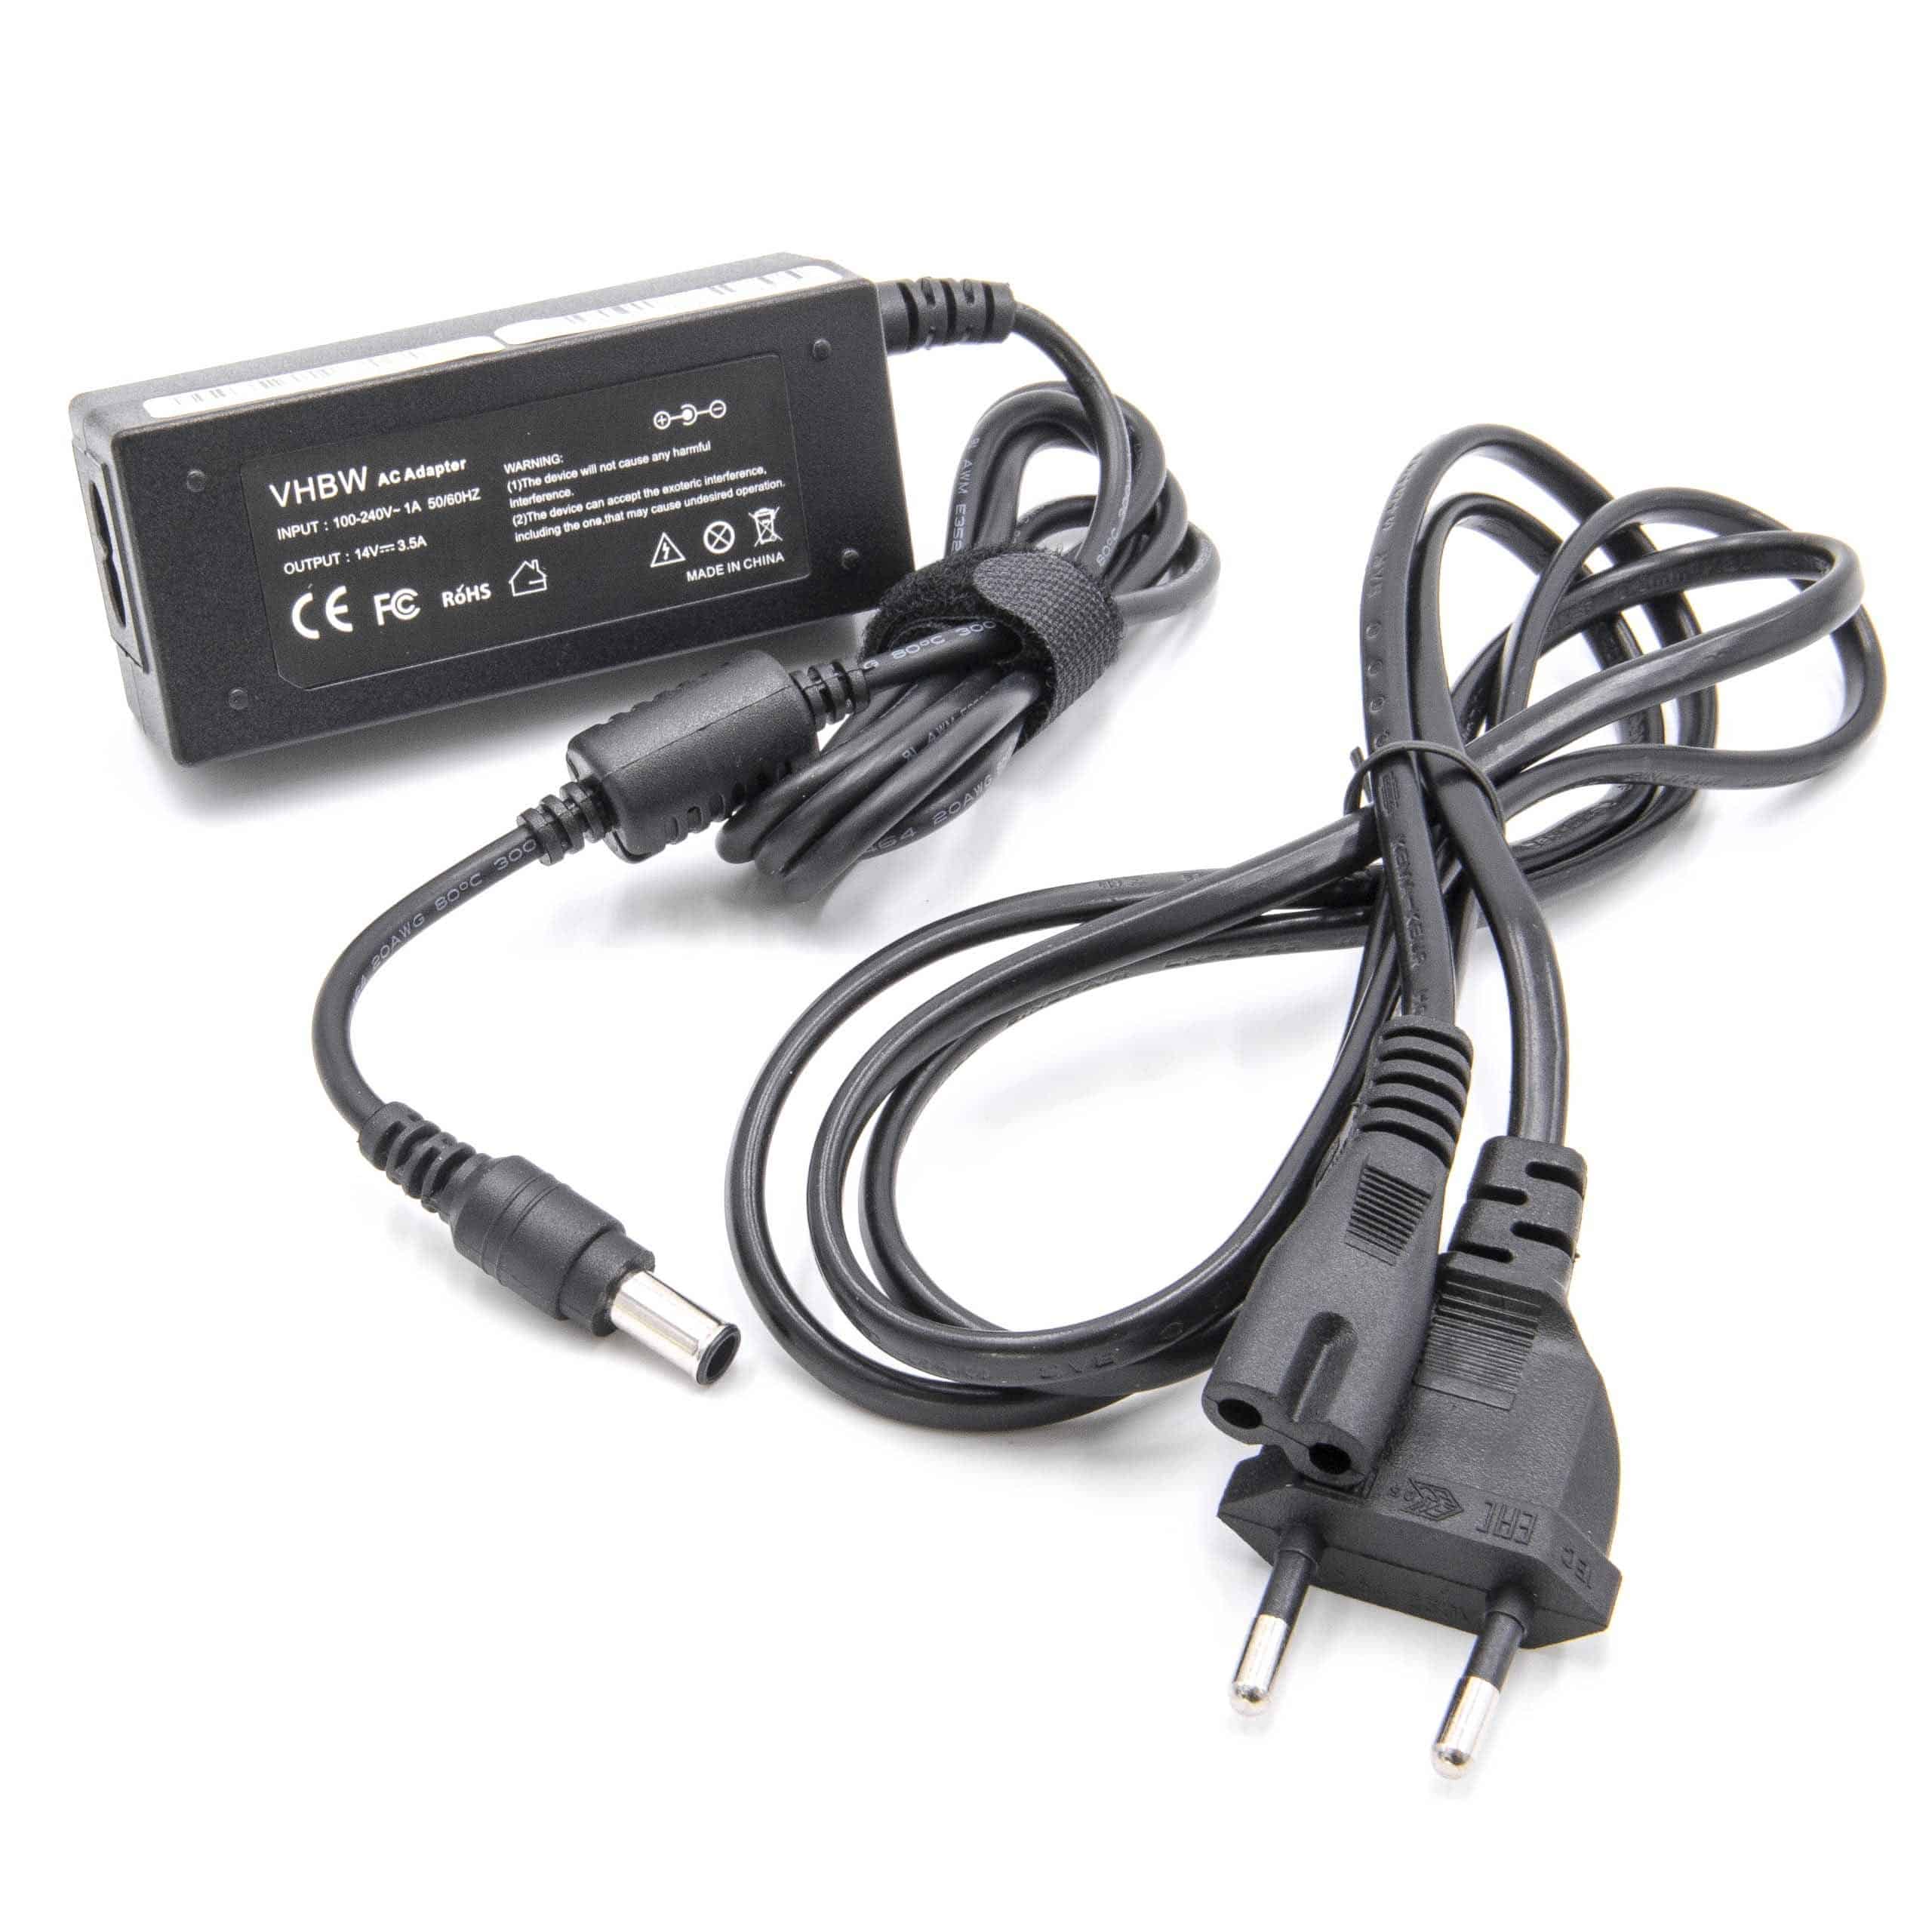 Mains Power Adapter replaces Sony AD-4214N for IBM Monitor etc. - 200 cm